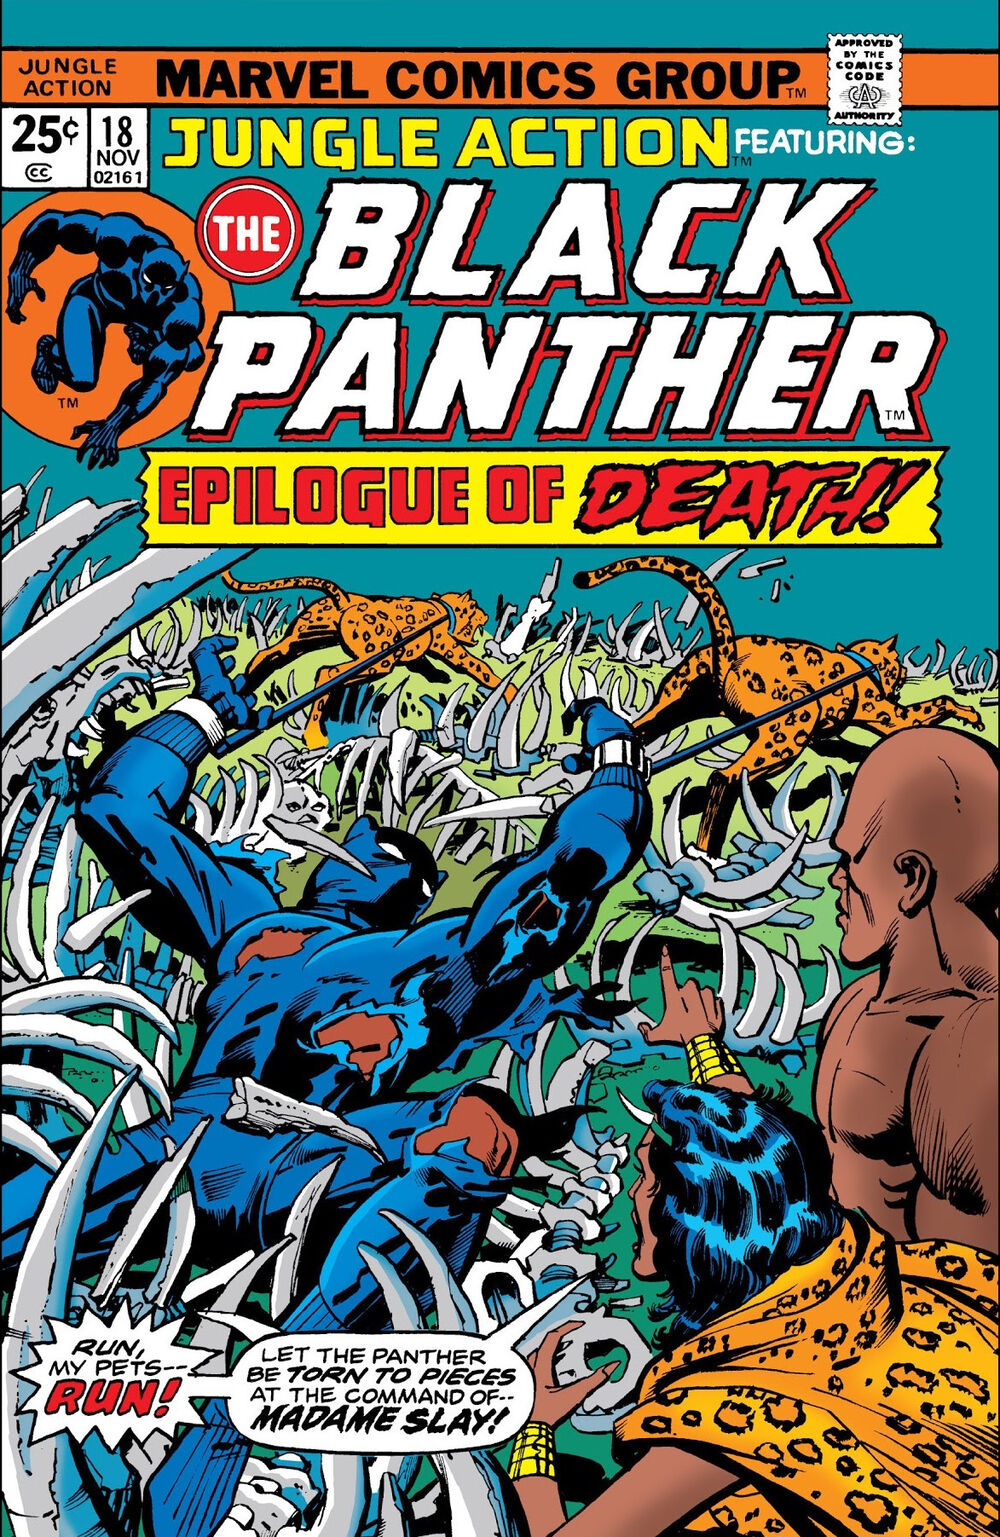 Jungle Action Featuring The Black Panther Volume 2 #18